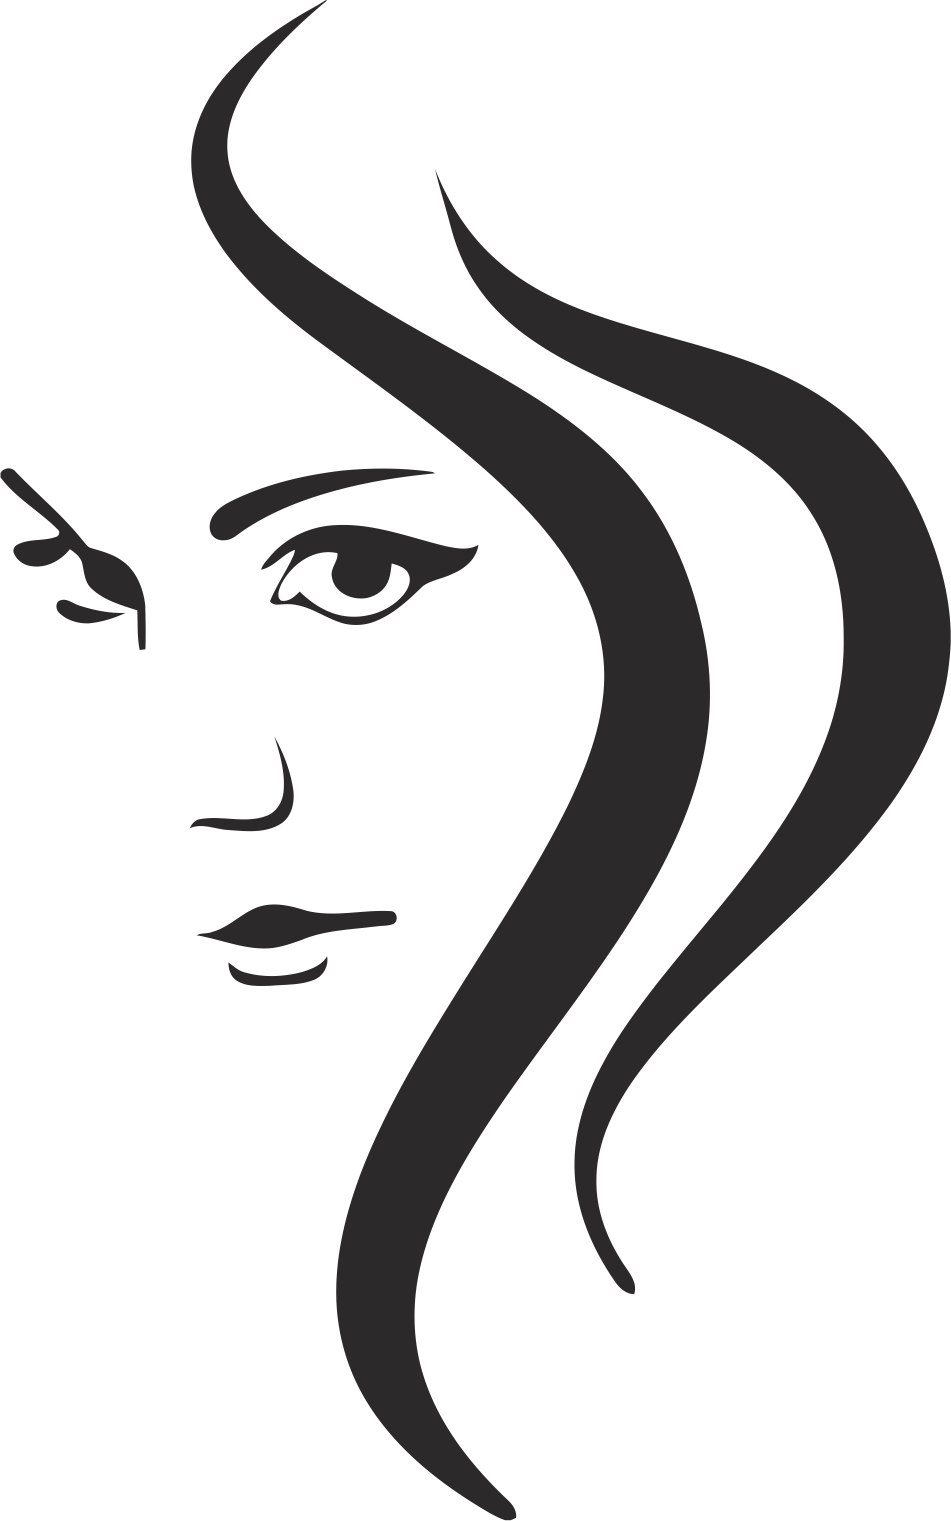 Download Woman Silhouette Free Vector cdr Download - 3axis.co